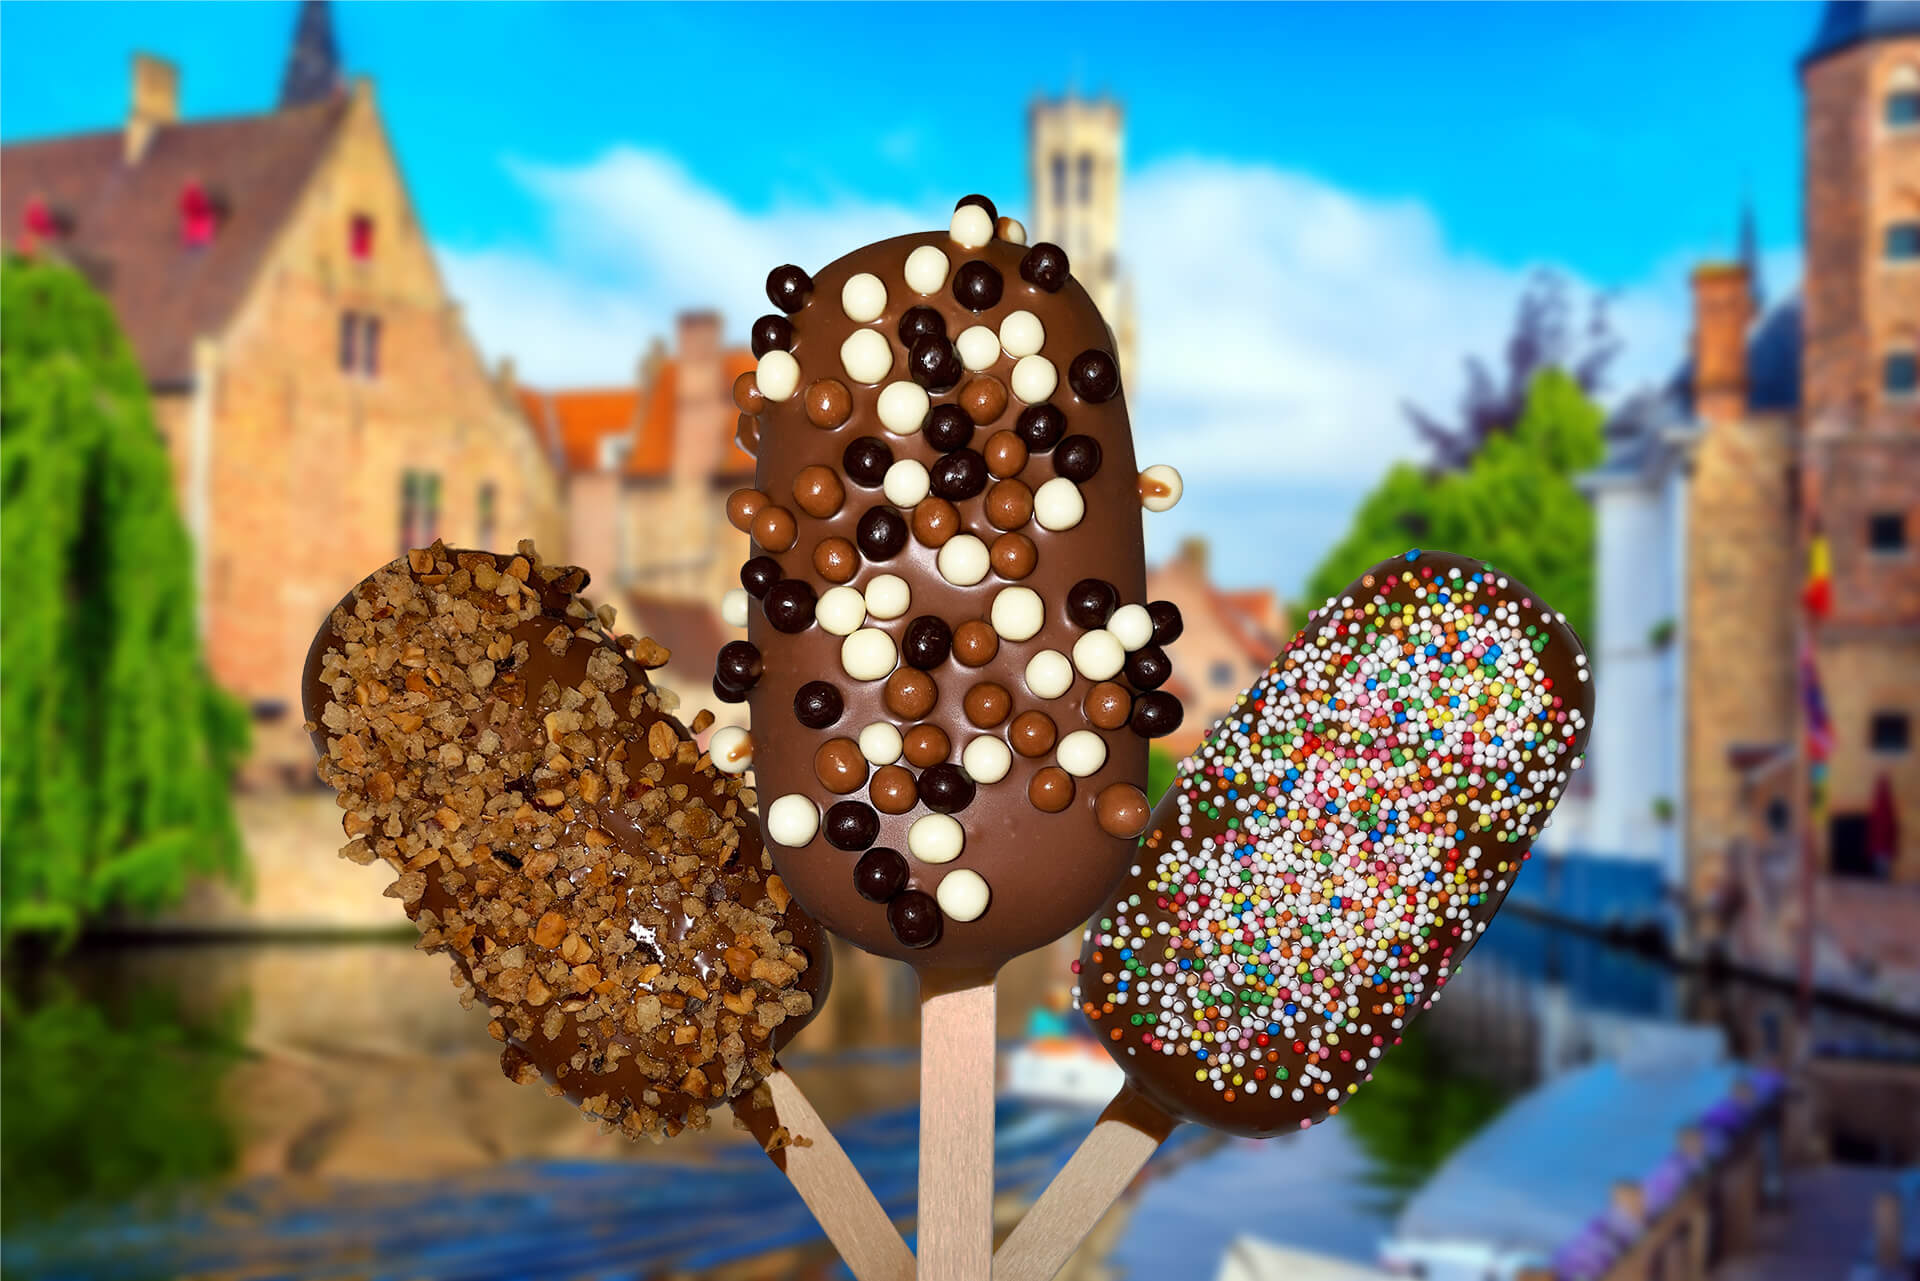 Three different customized Go.fre ice-creams-on-a-stick in front of the Belfort of Bruges.